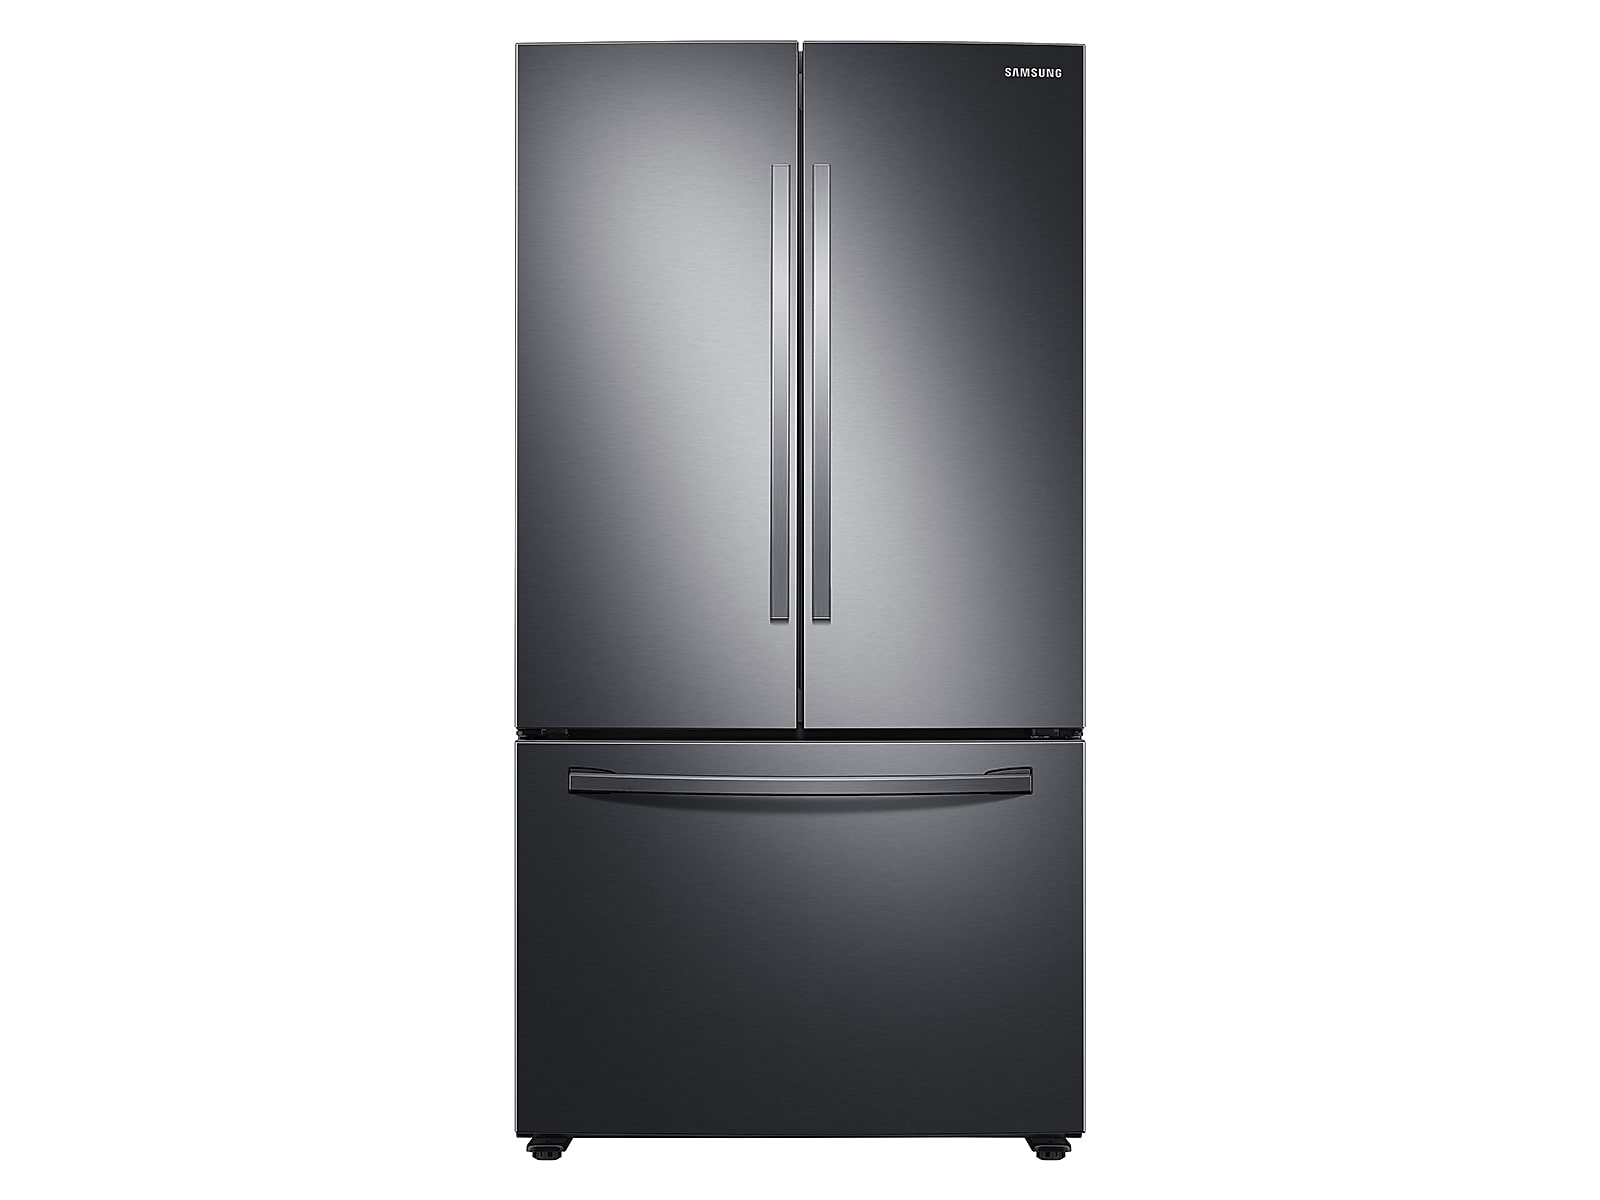 Samsung 28 cu. ft. Large Capacity 3-Door French Door Refrigerator with AutoFill Water Pitcher in Black Stainless Steel(RF28T5021SG/AA)